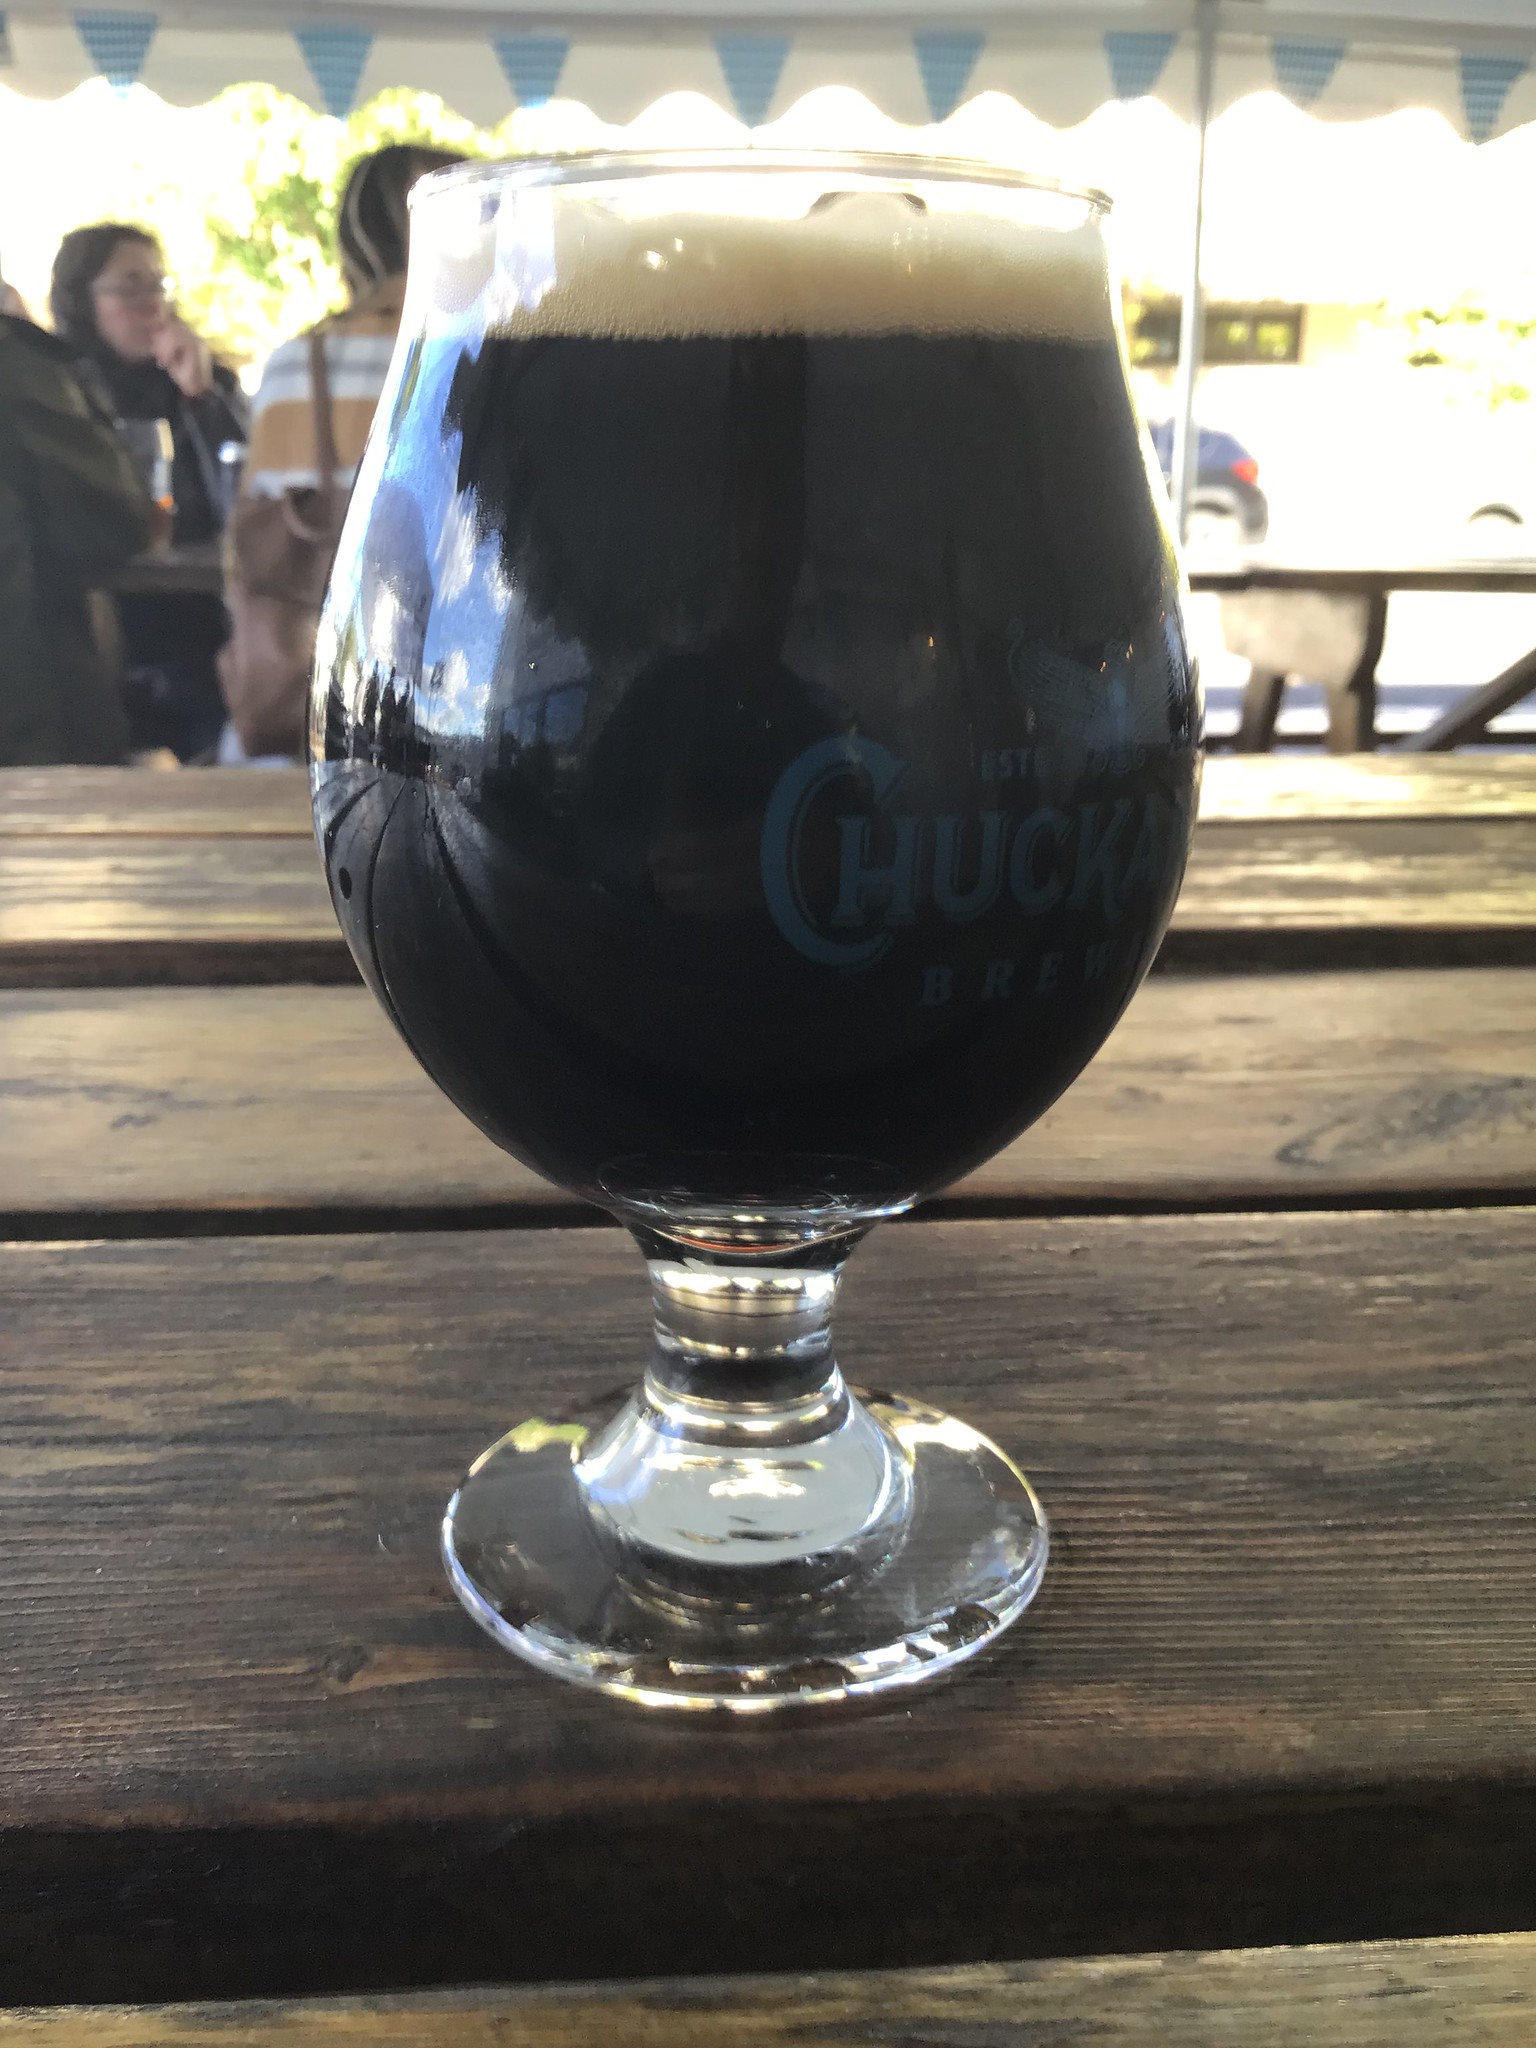 Chuckanut barrel aged stout in a glass on a table outdoors